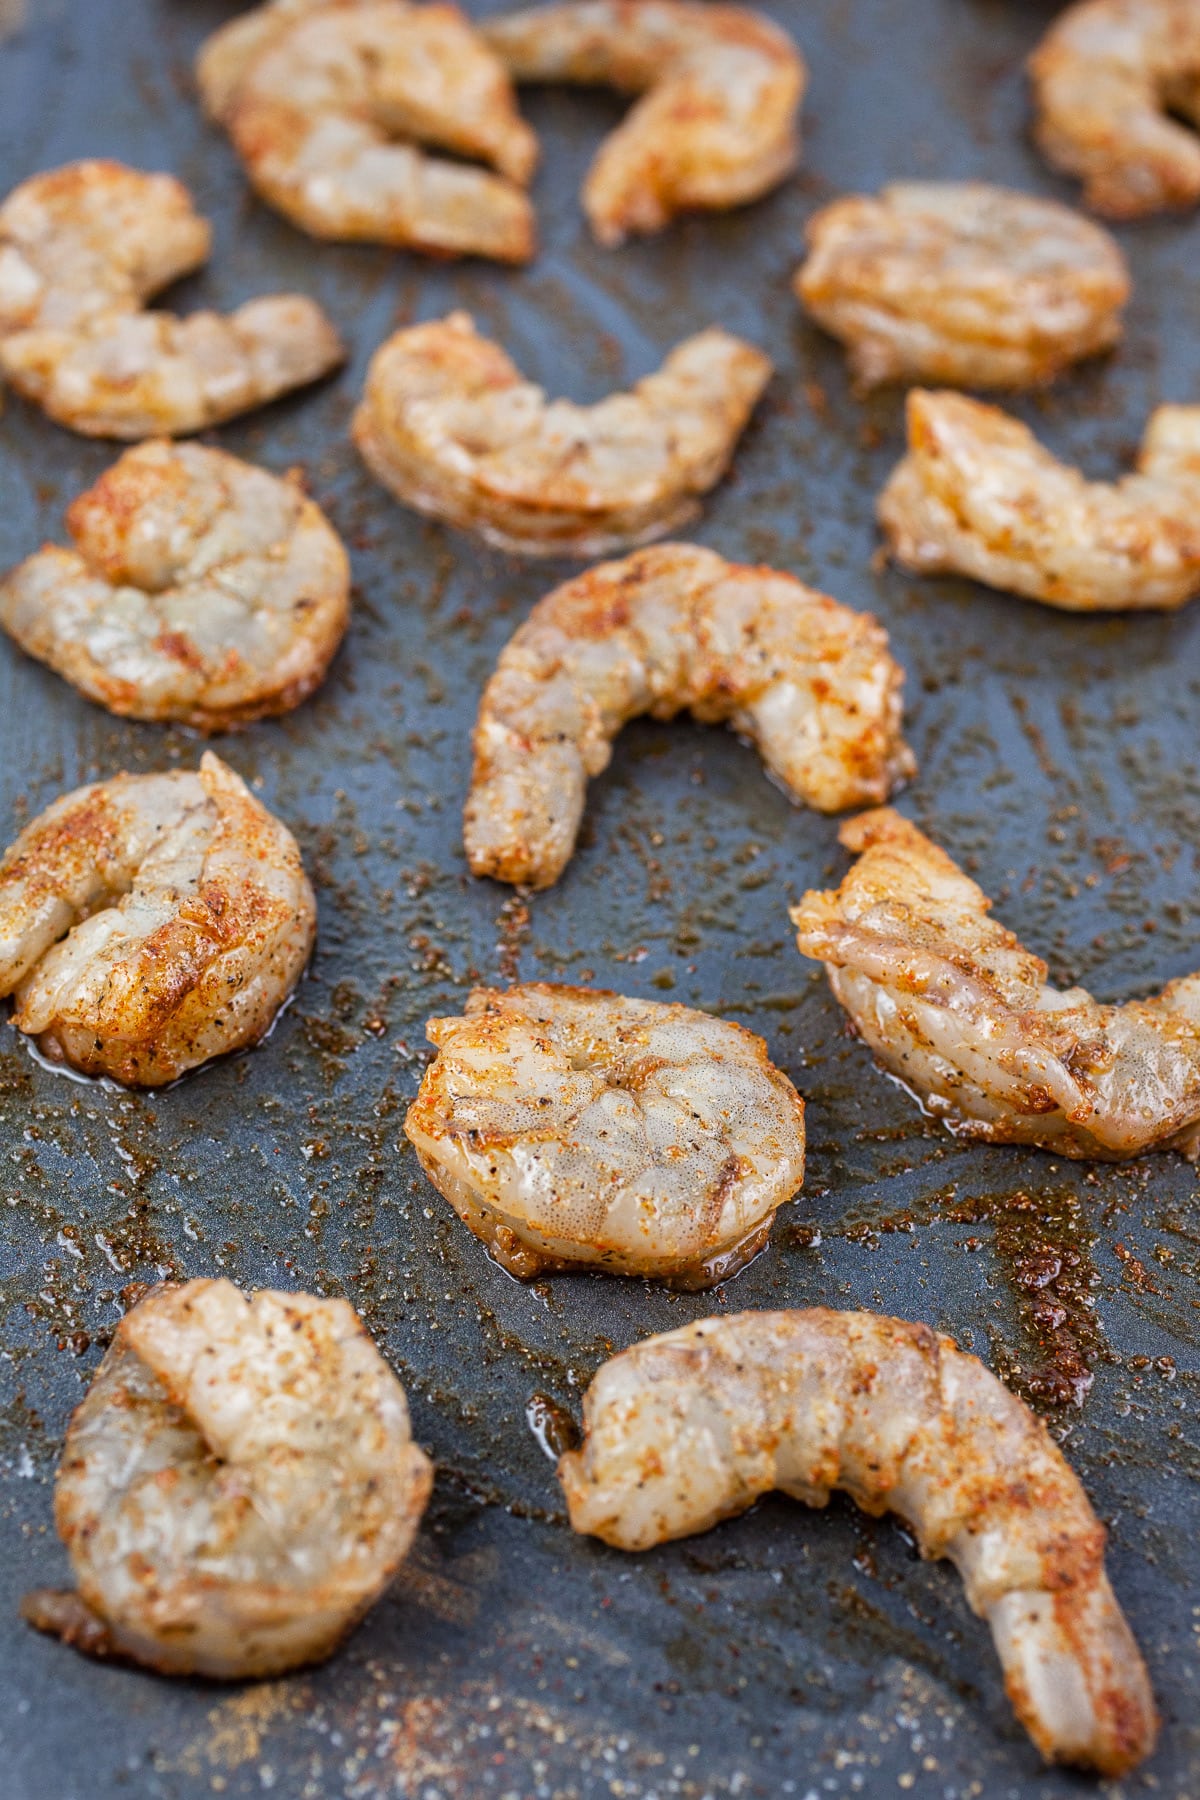 Raw shrimp tossed with olive oil and spices on baking sheet.